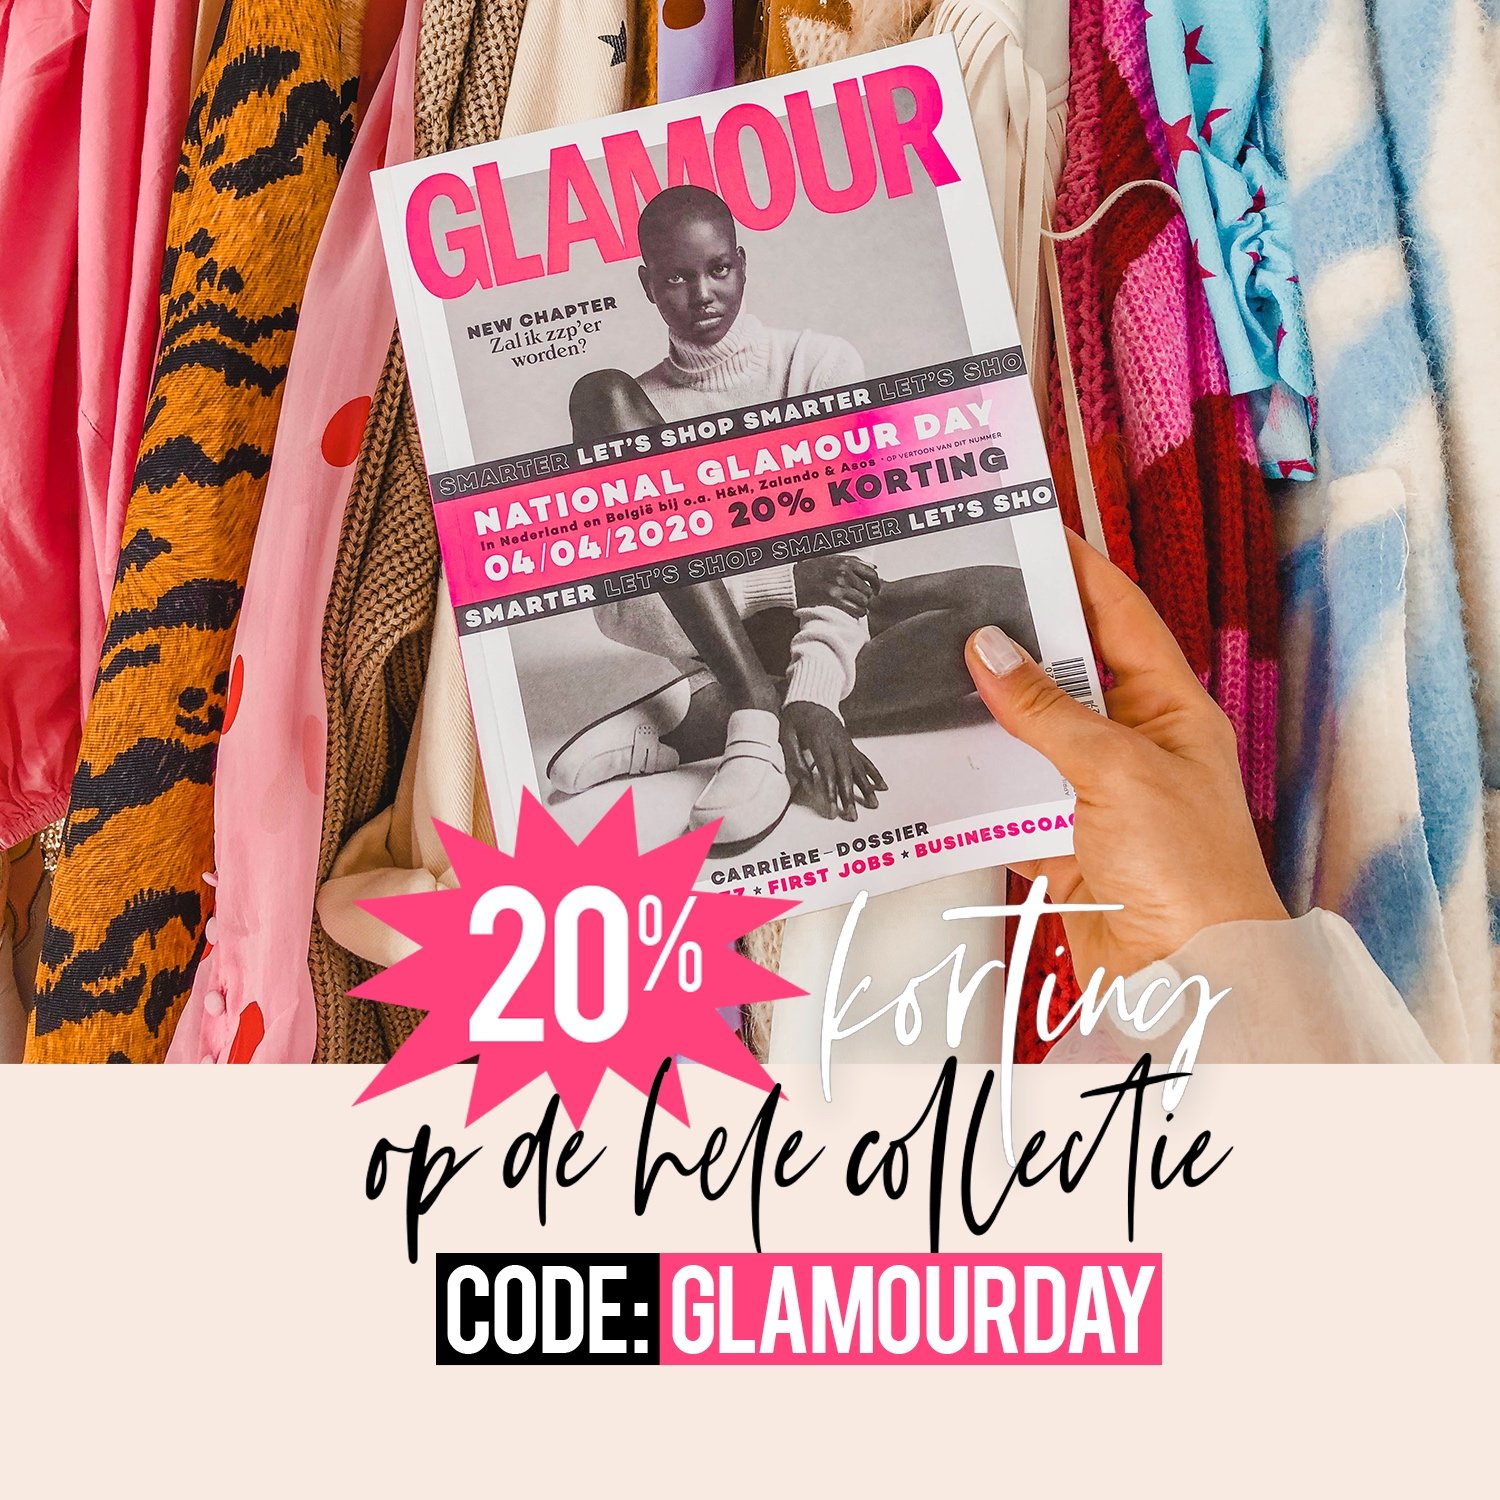 : Glamourday start NU! 20% korting hele collectie 💘 | Milled